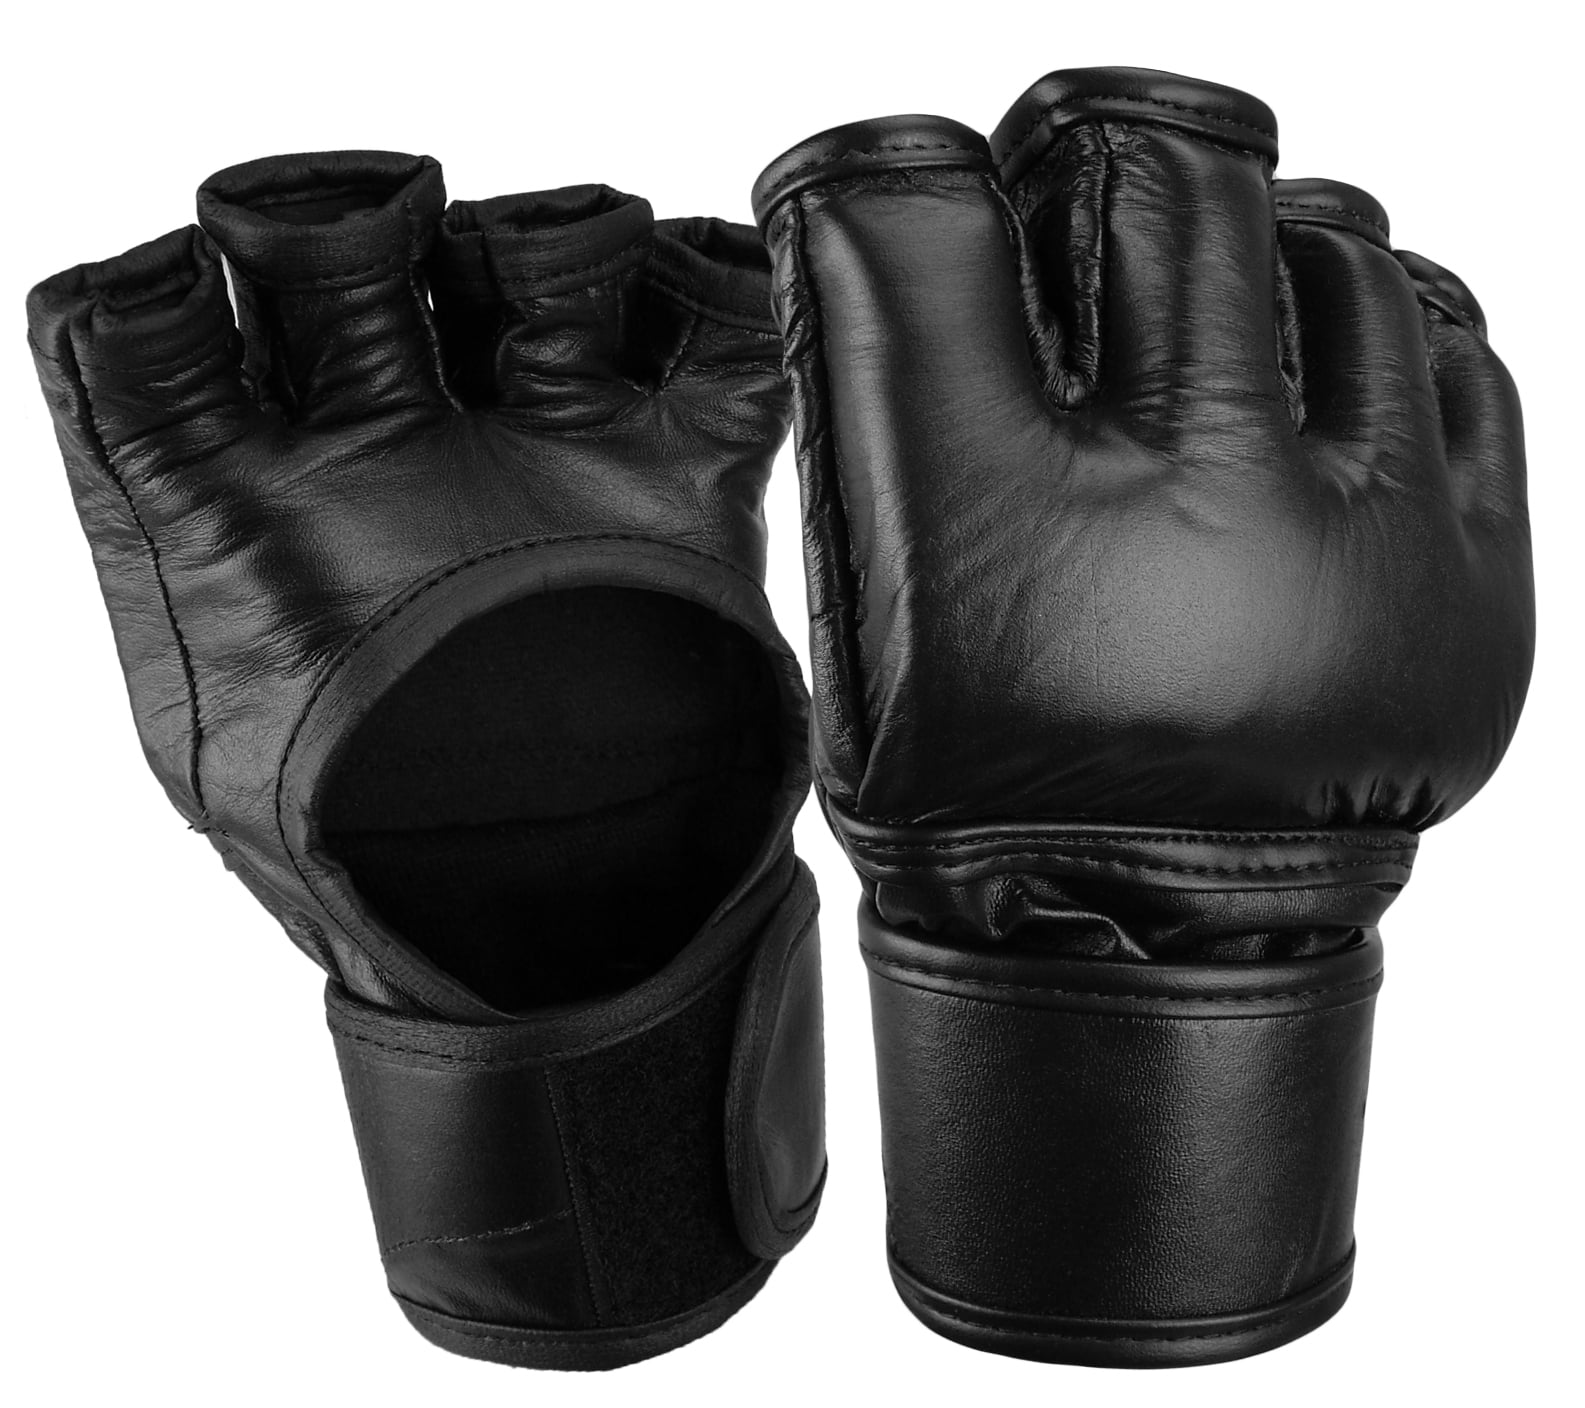 Pro-Style MMA Gloves in Genuine Leather for Professional Training & Competition. 